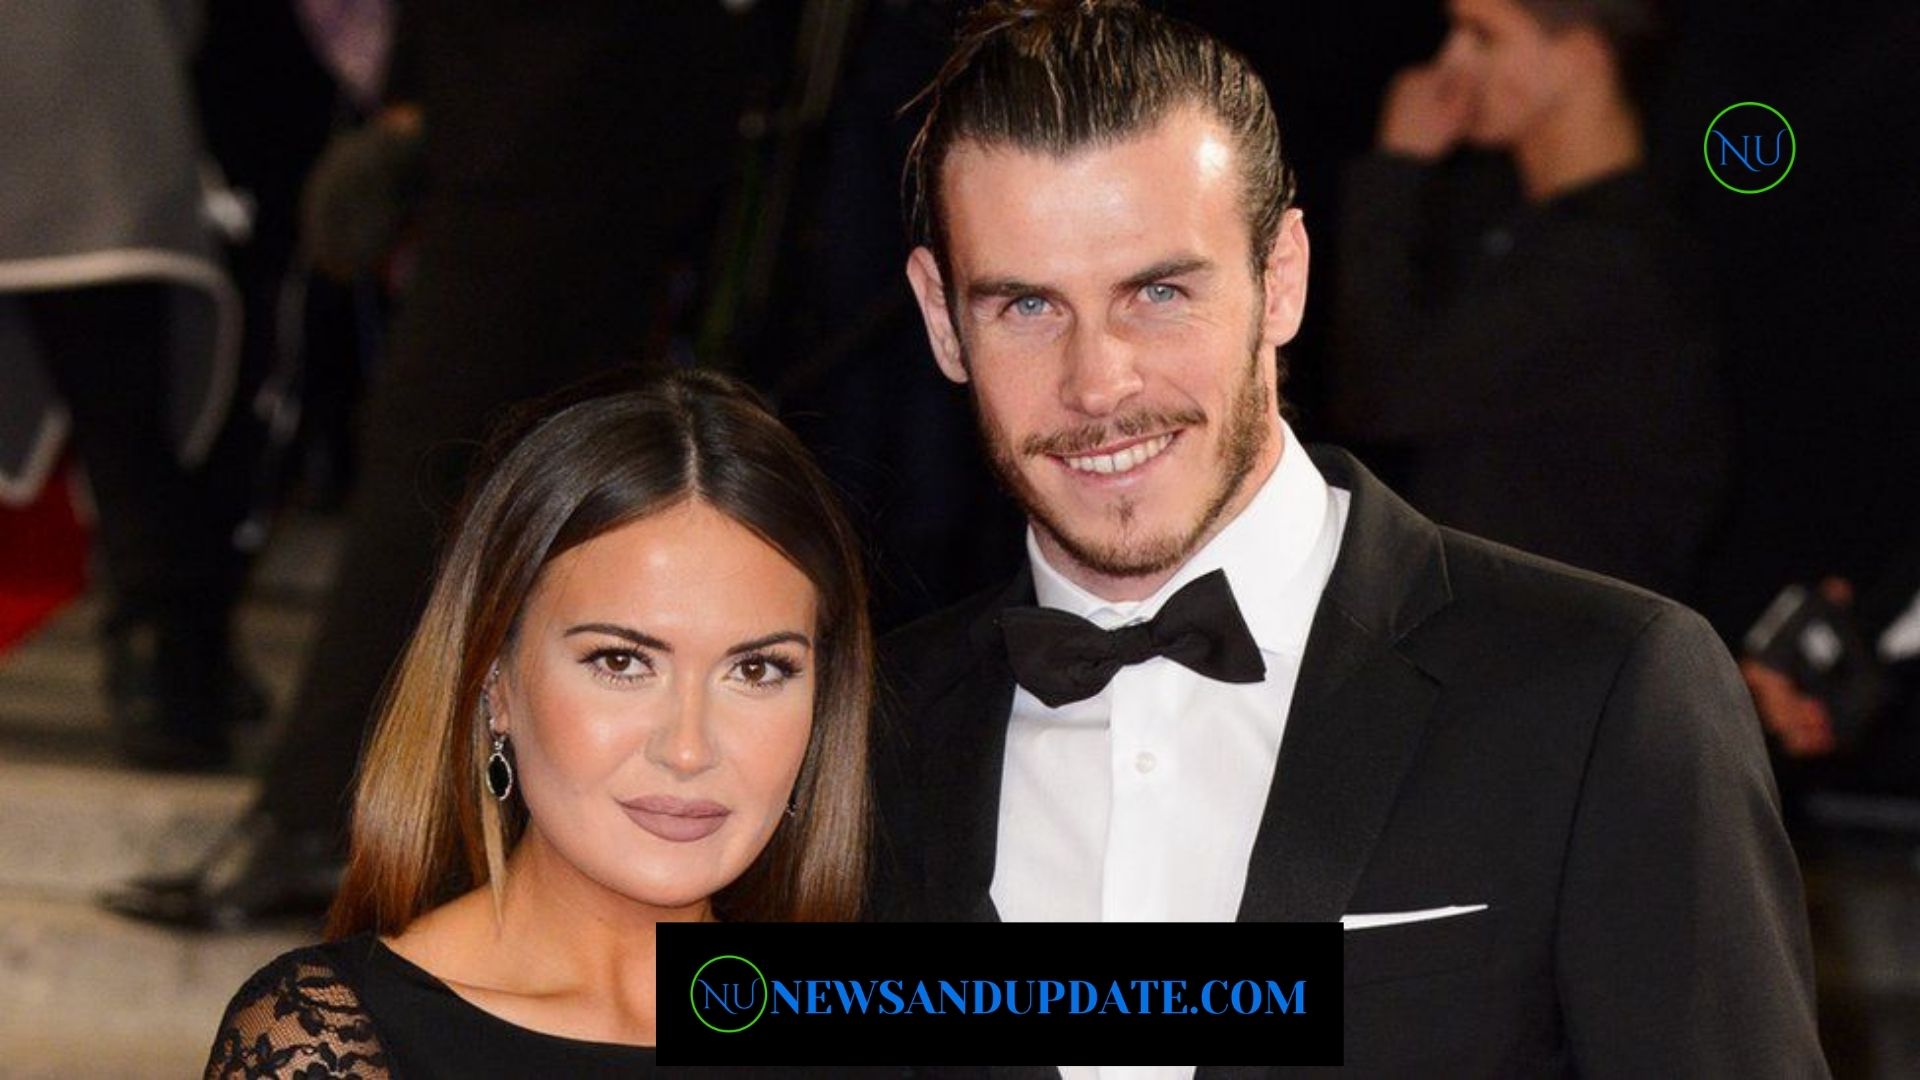 Who Is Gareth Bale’s Wife?